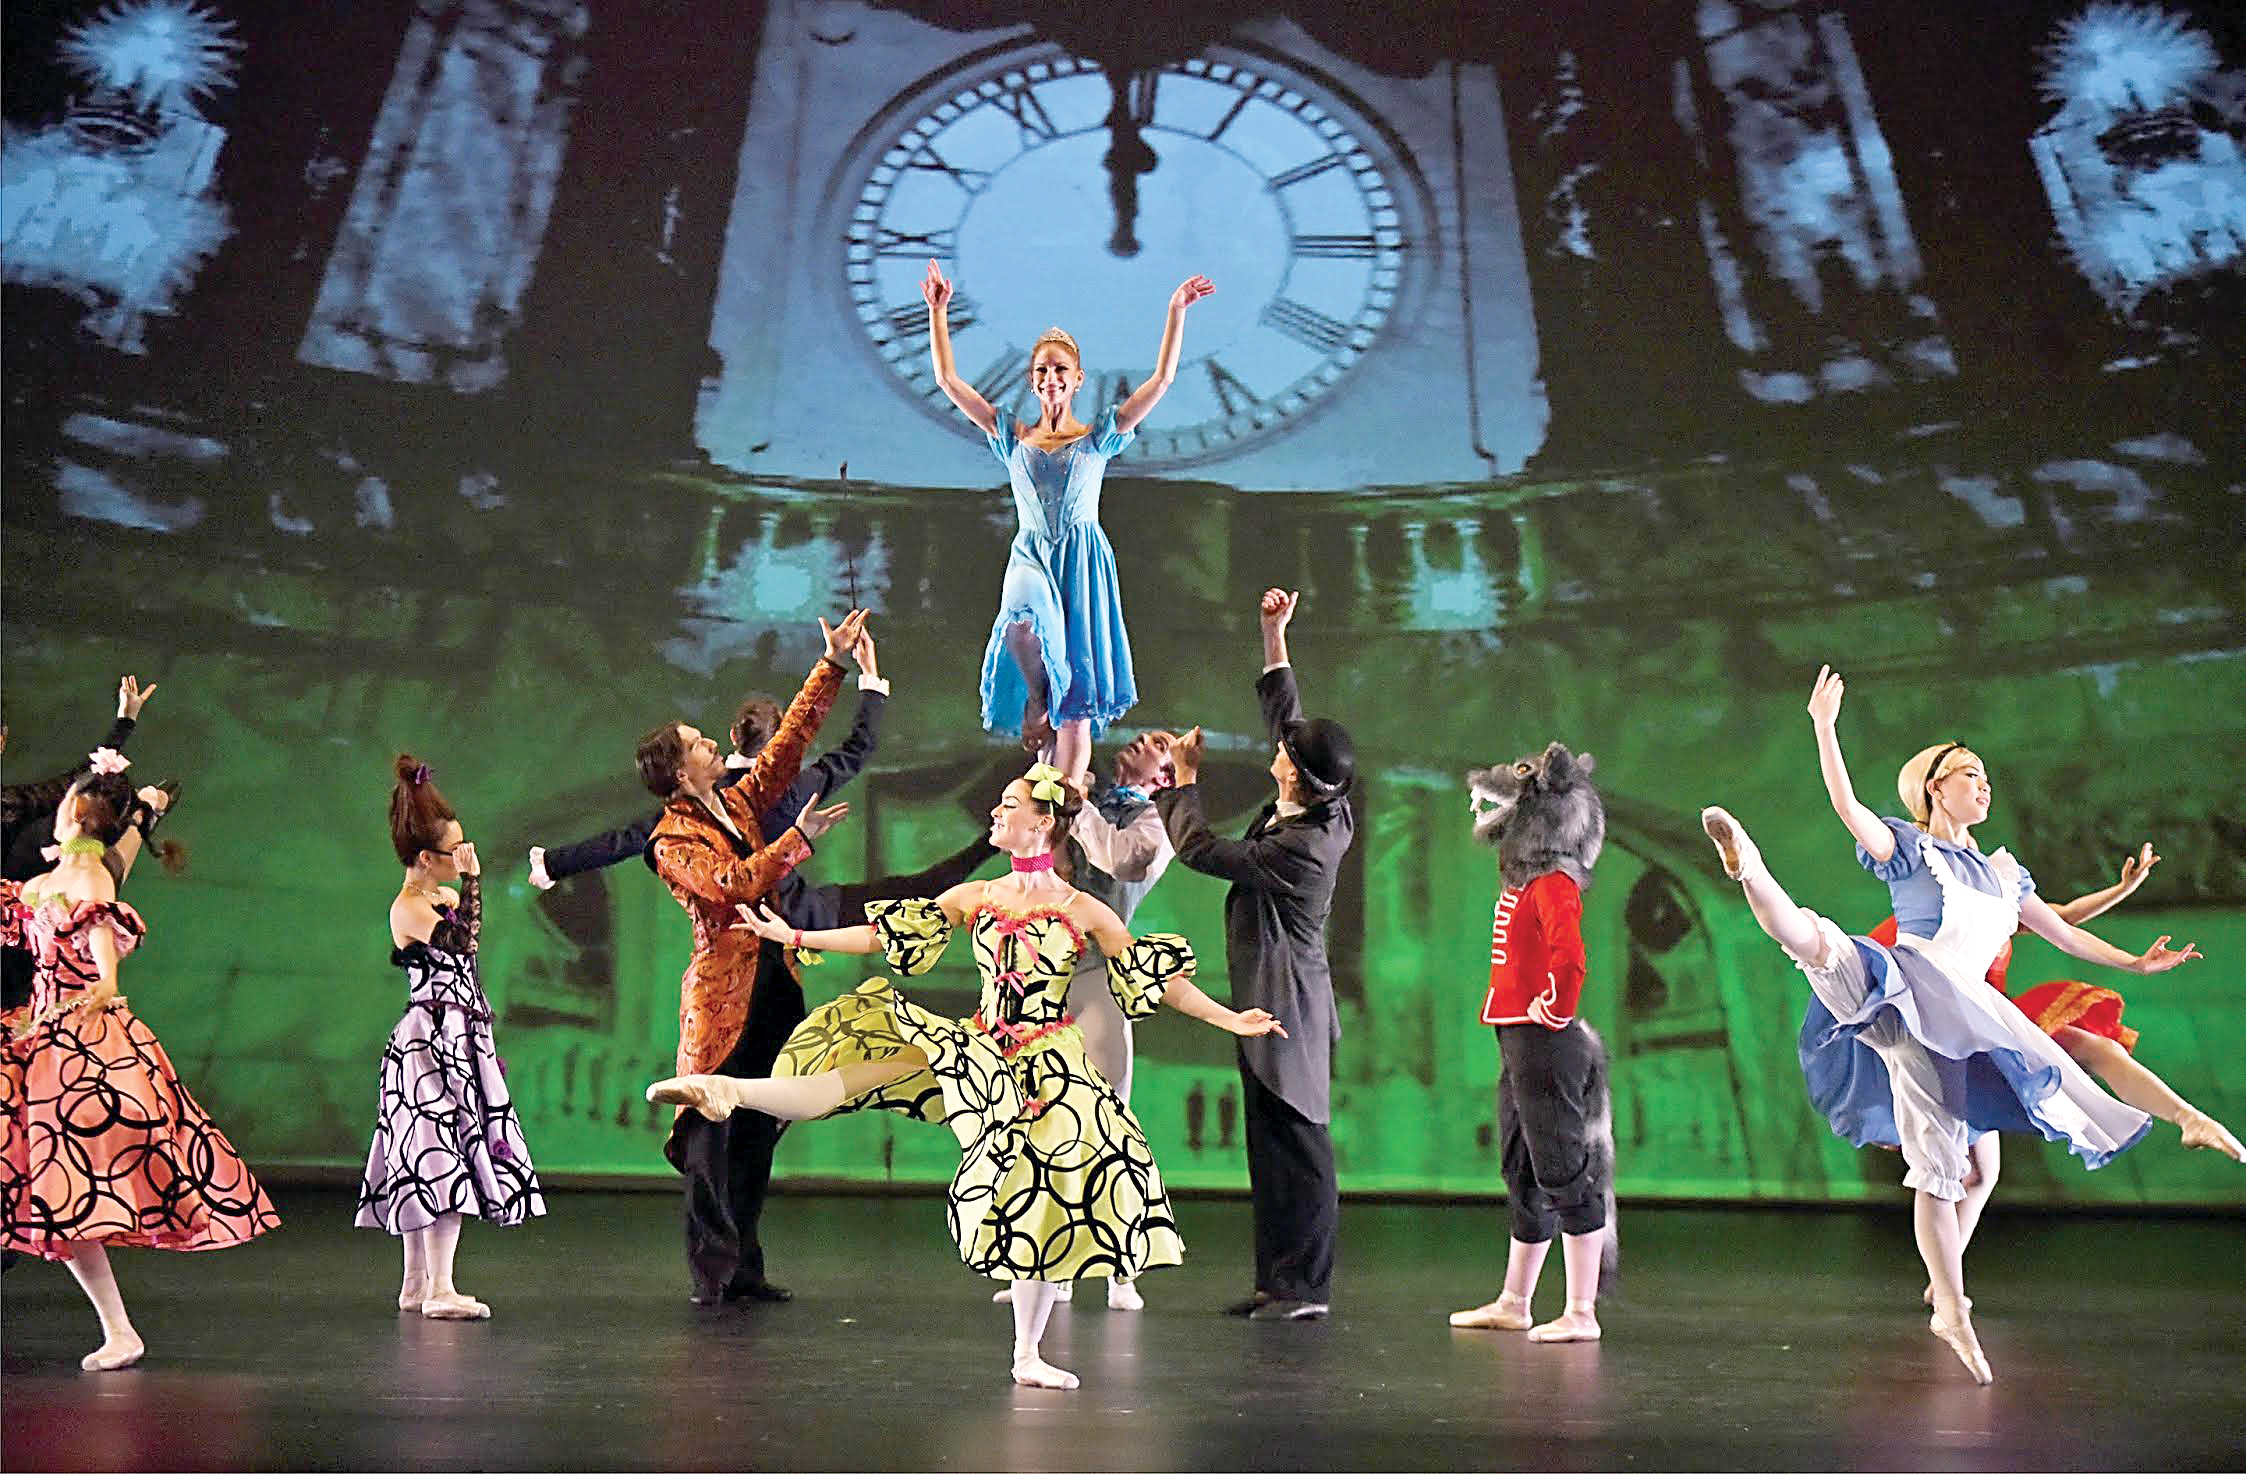 Ballet Victoria dancers on May 20 run through a dress rehearsal for the troupe's production of “Cinderella” at the Royal Theatre. The troupe is performing a mixed program Saturday and Sunday at noon as part of the Juan De Fuca Festival. (Victoria News)